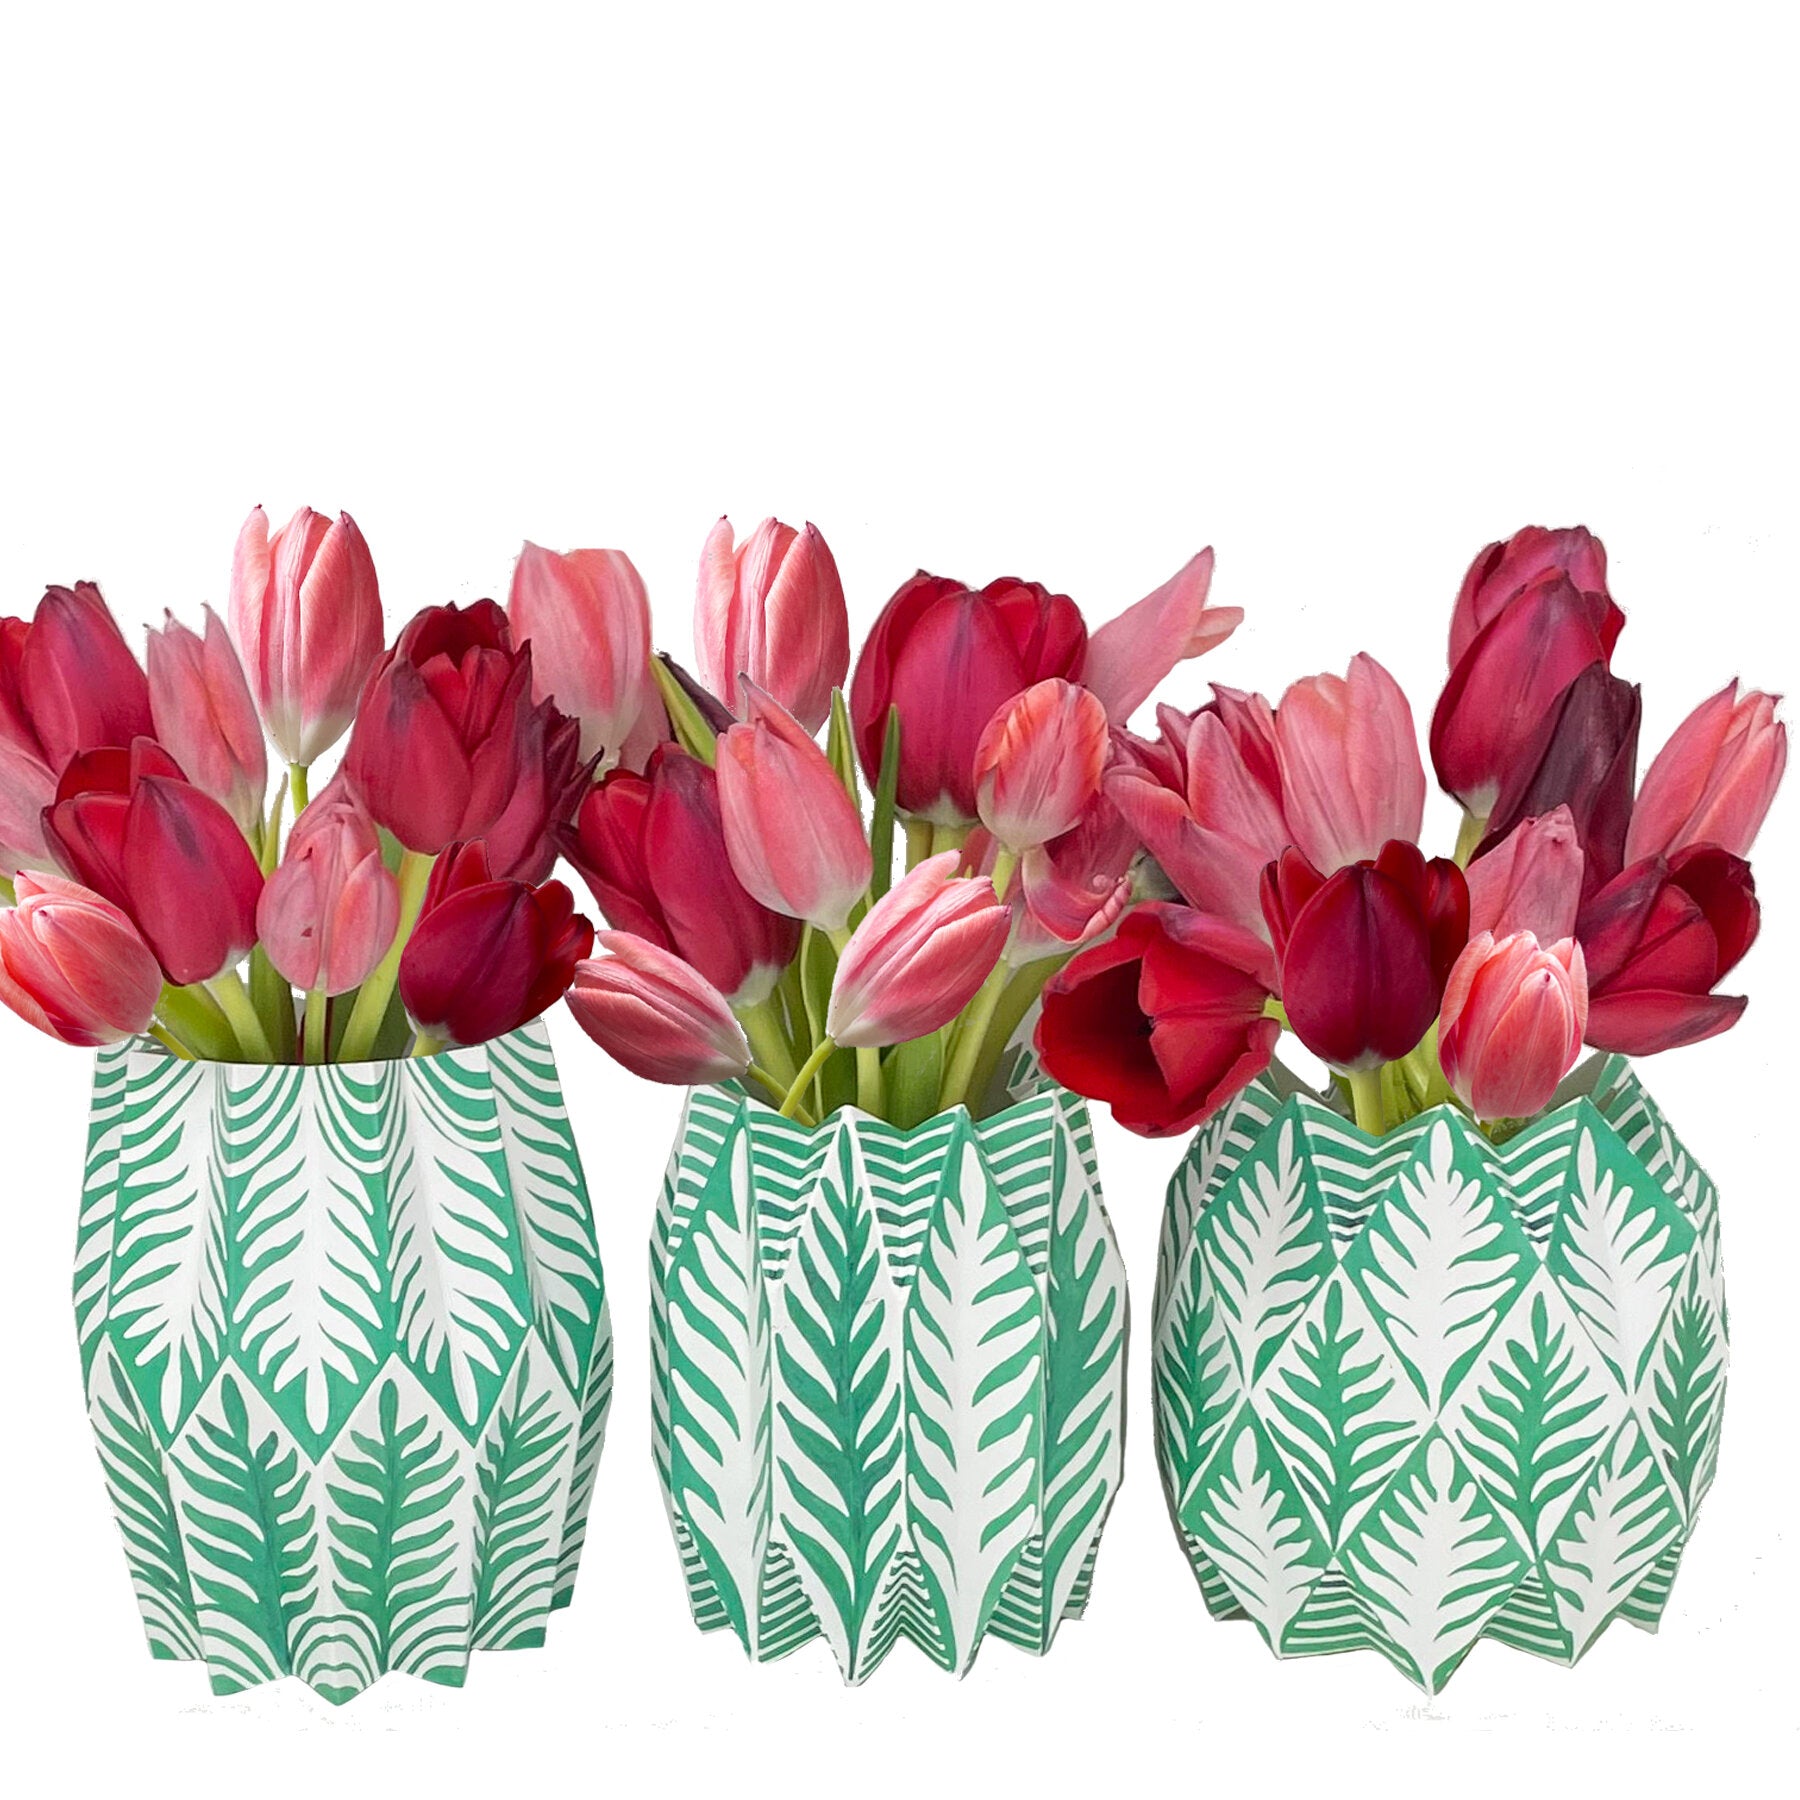 Green and white fern patterned paper vases with red tulips